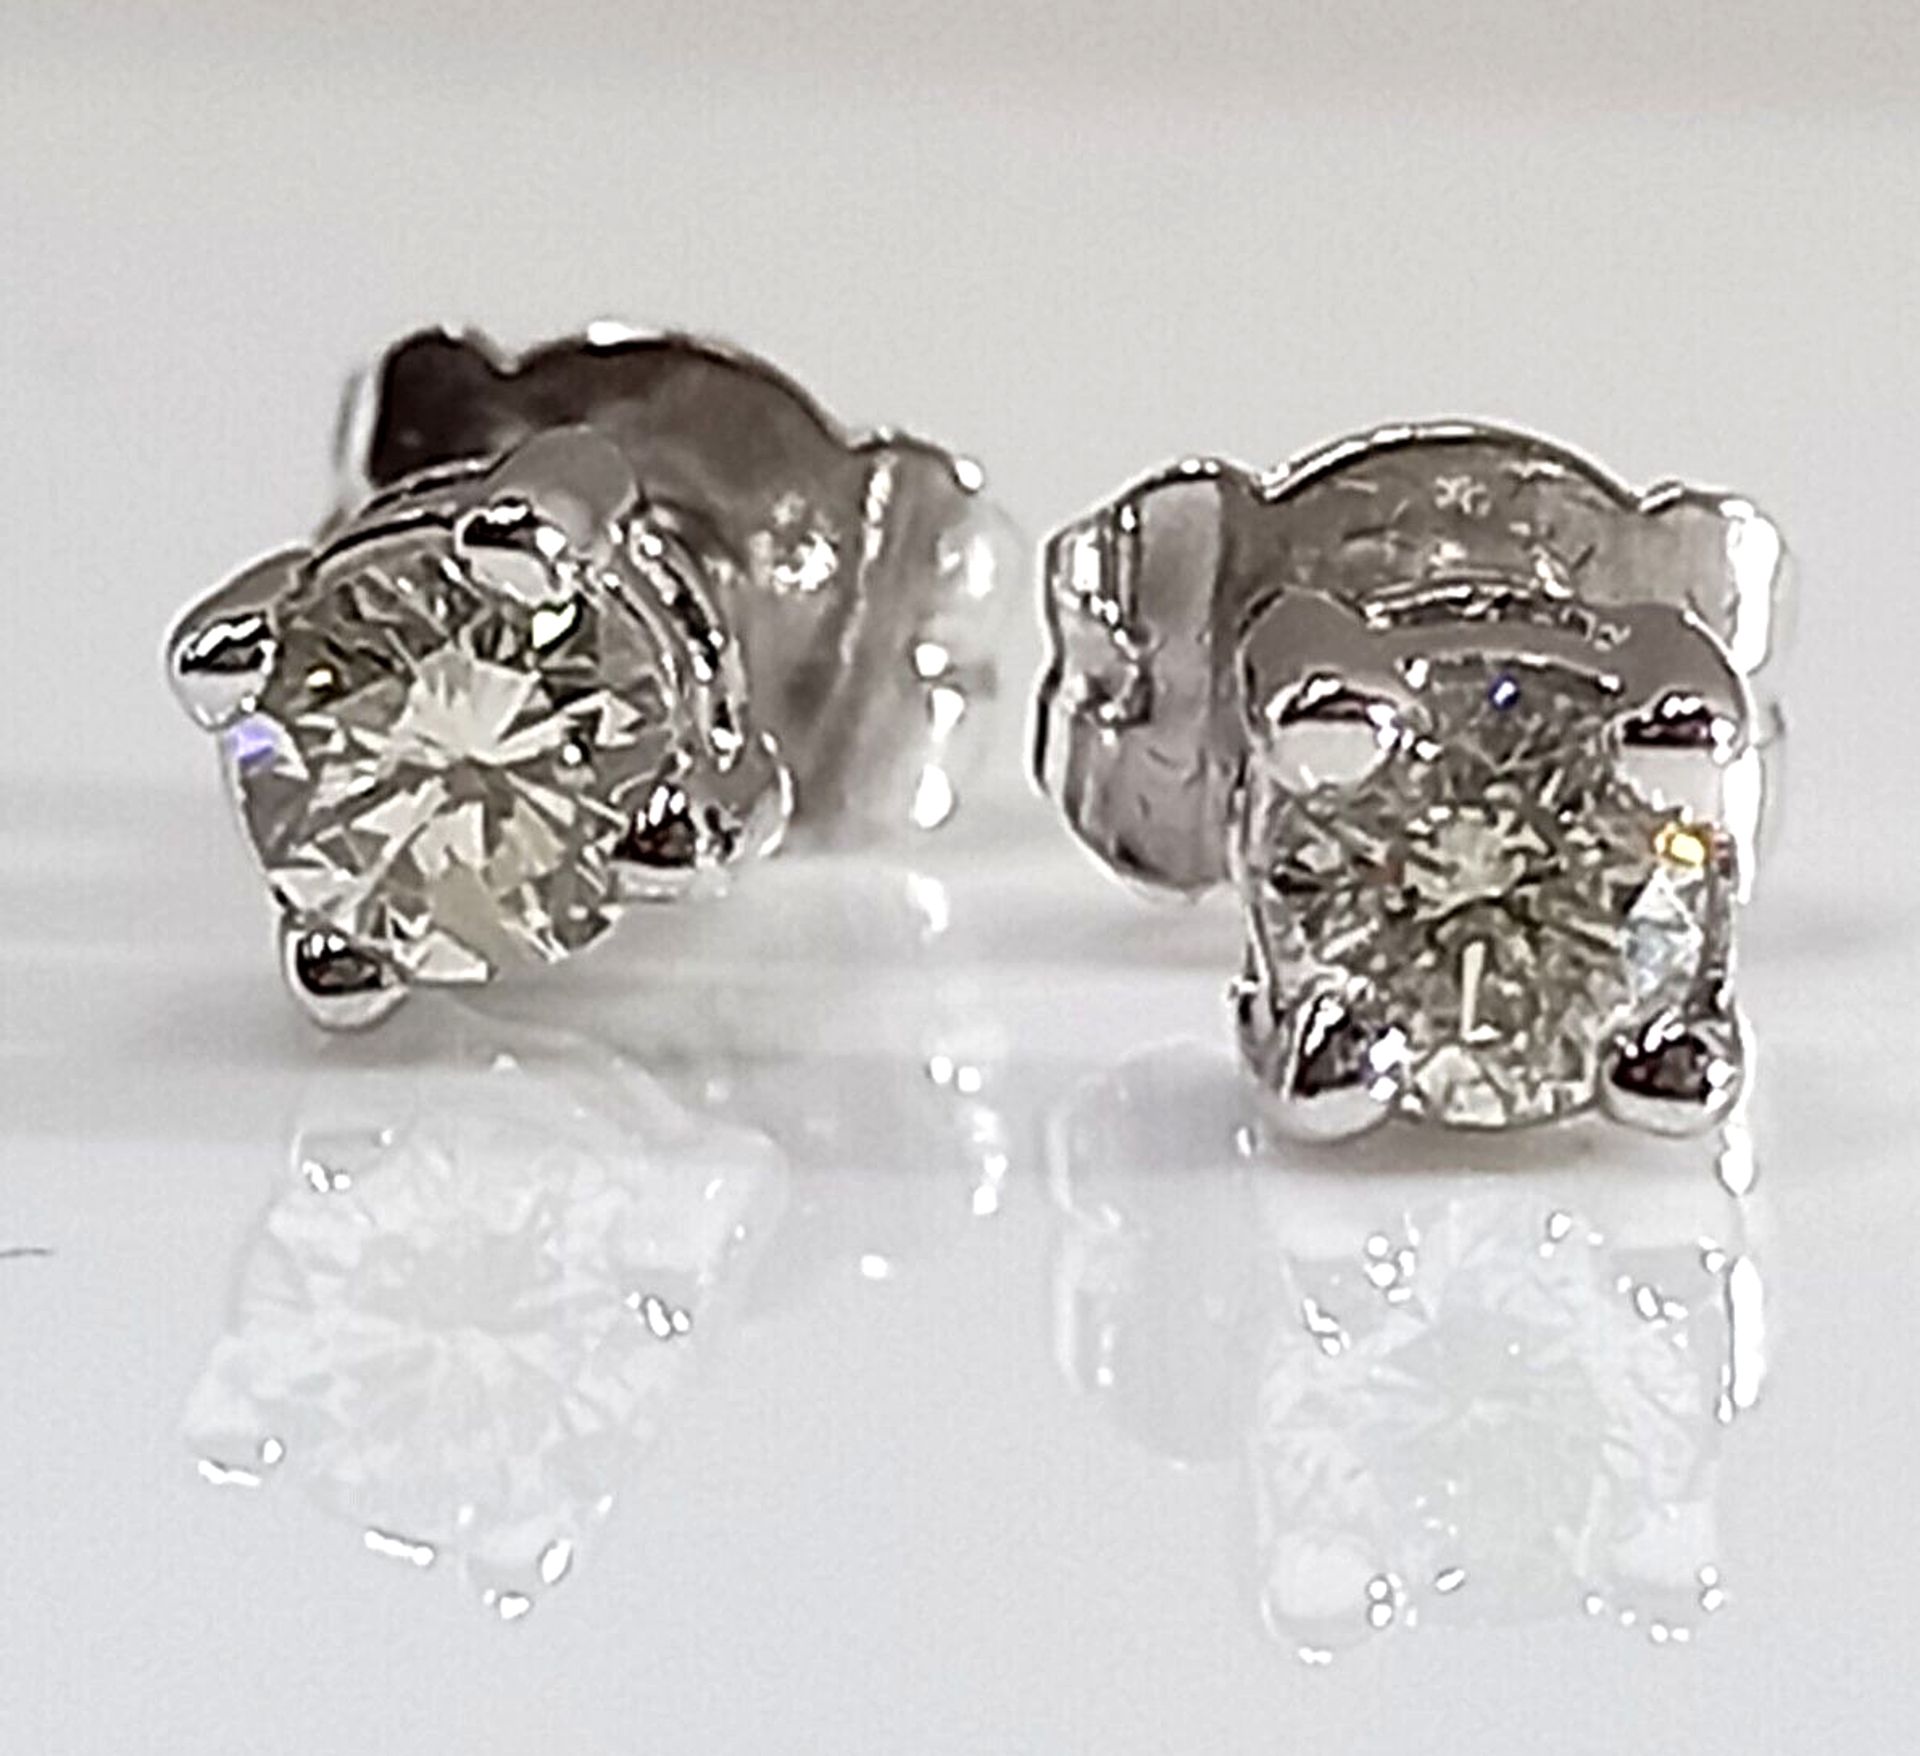 0.50CT DIAMOND STUD EARRINGS 18CT WHITE GOLD IN GIFT BOX WITH VALUATION CERTIFICATE OF £2495 - Image 3 of 5